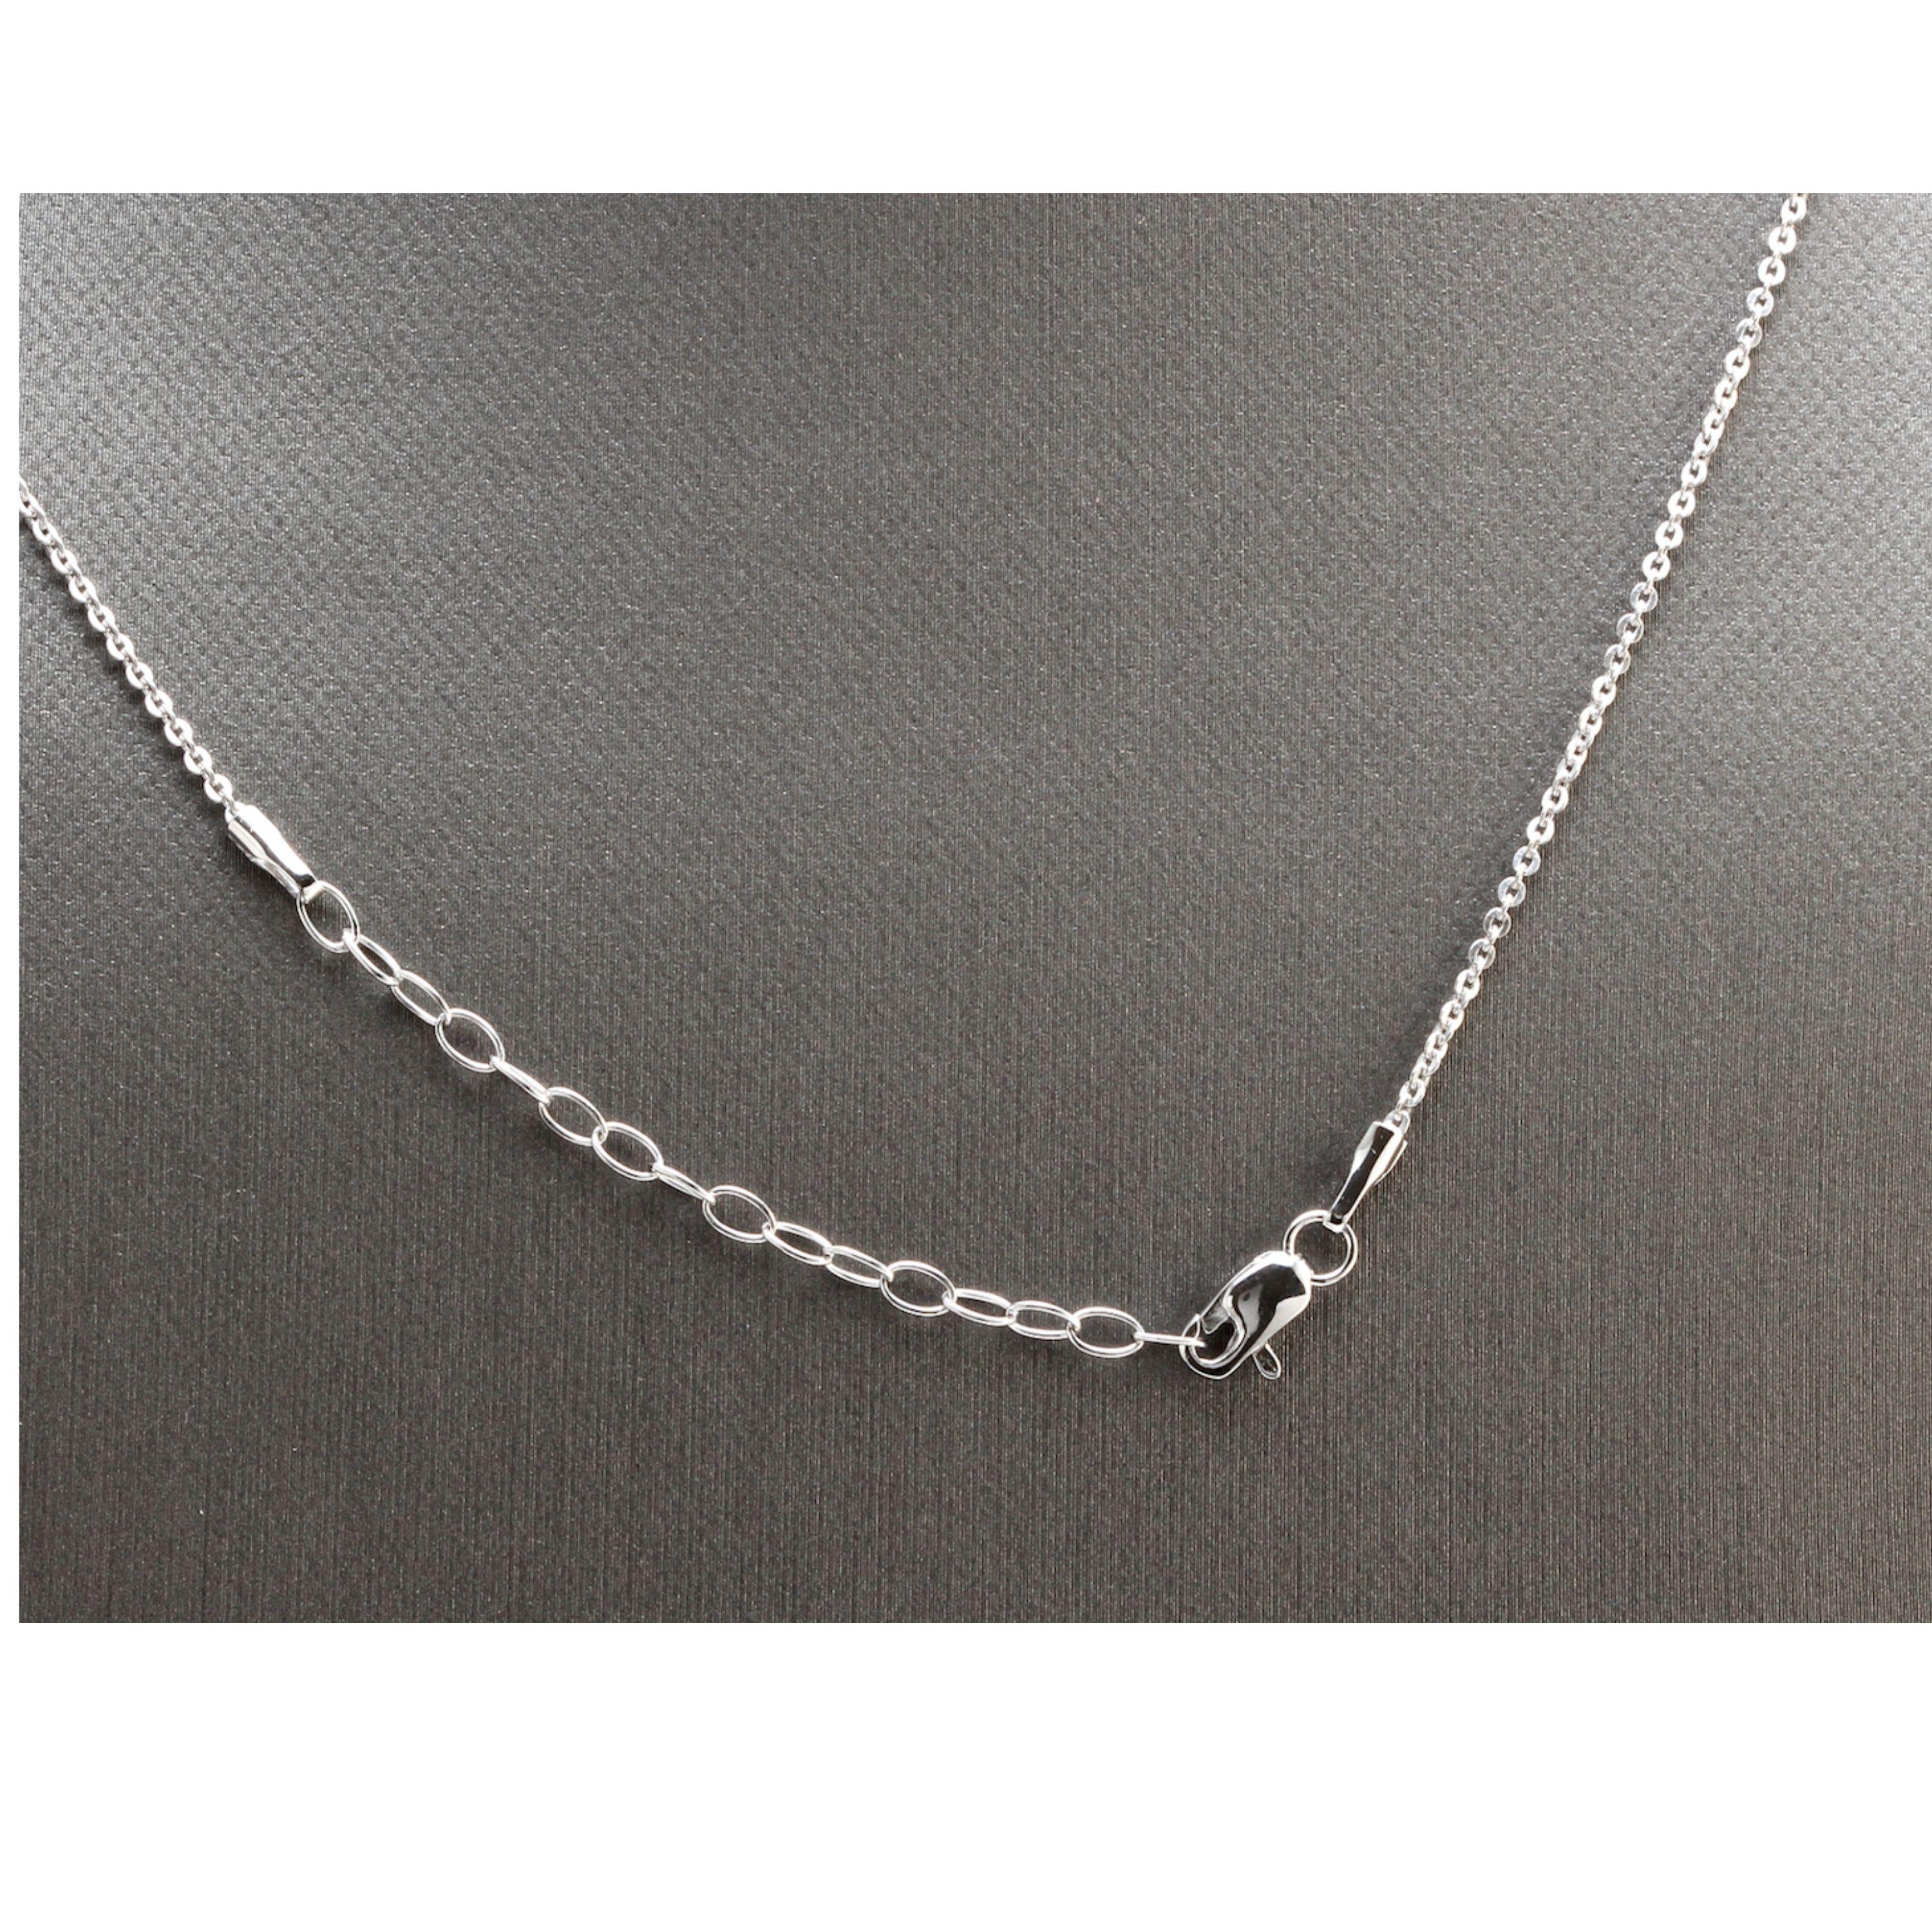 Splendid 14k Solid White Gold Infinity Necklace with Natural Diamond Accent and Raw Sapphires

Amazing looking piece!

Stamped: 14k

Natural Diamond Weight: 0.005ct (H / SI2)

Natural Raw Sapphires

Chain Length is: Adjustable

Infinity Sign